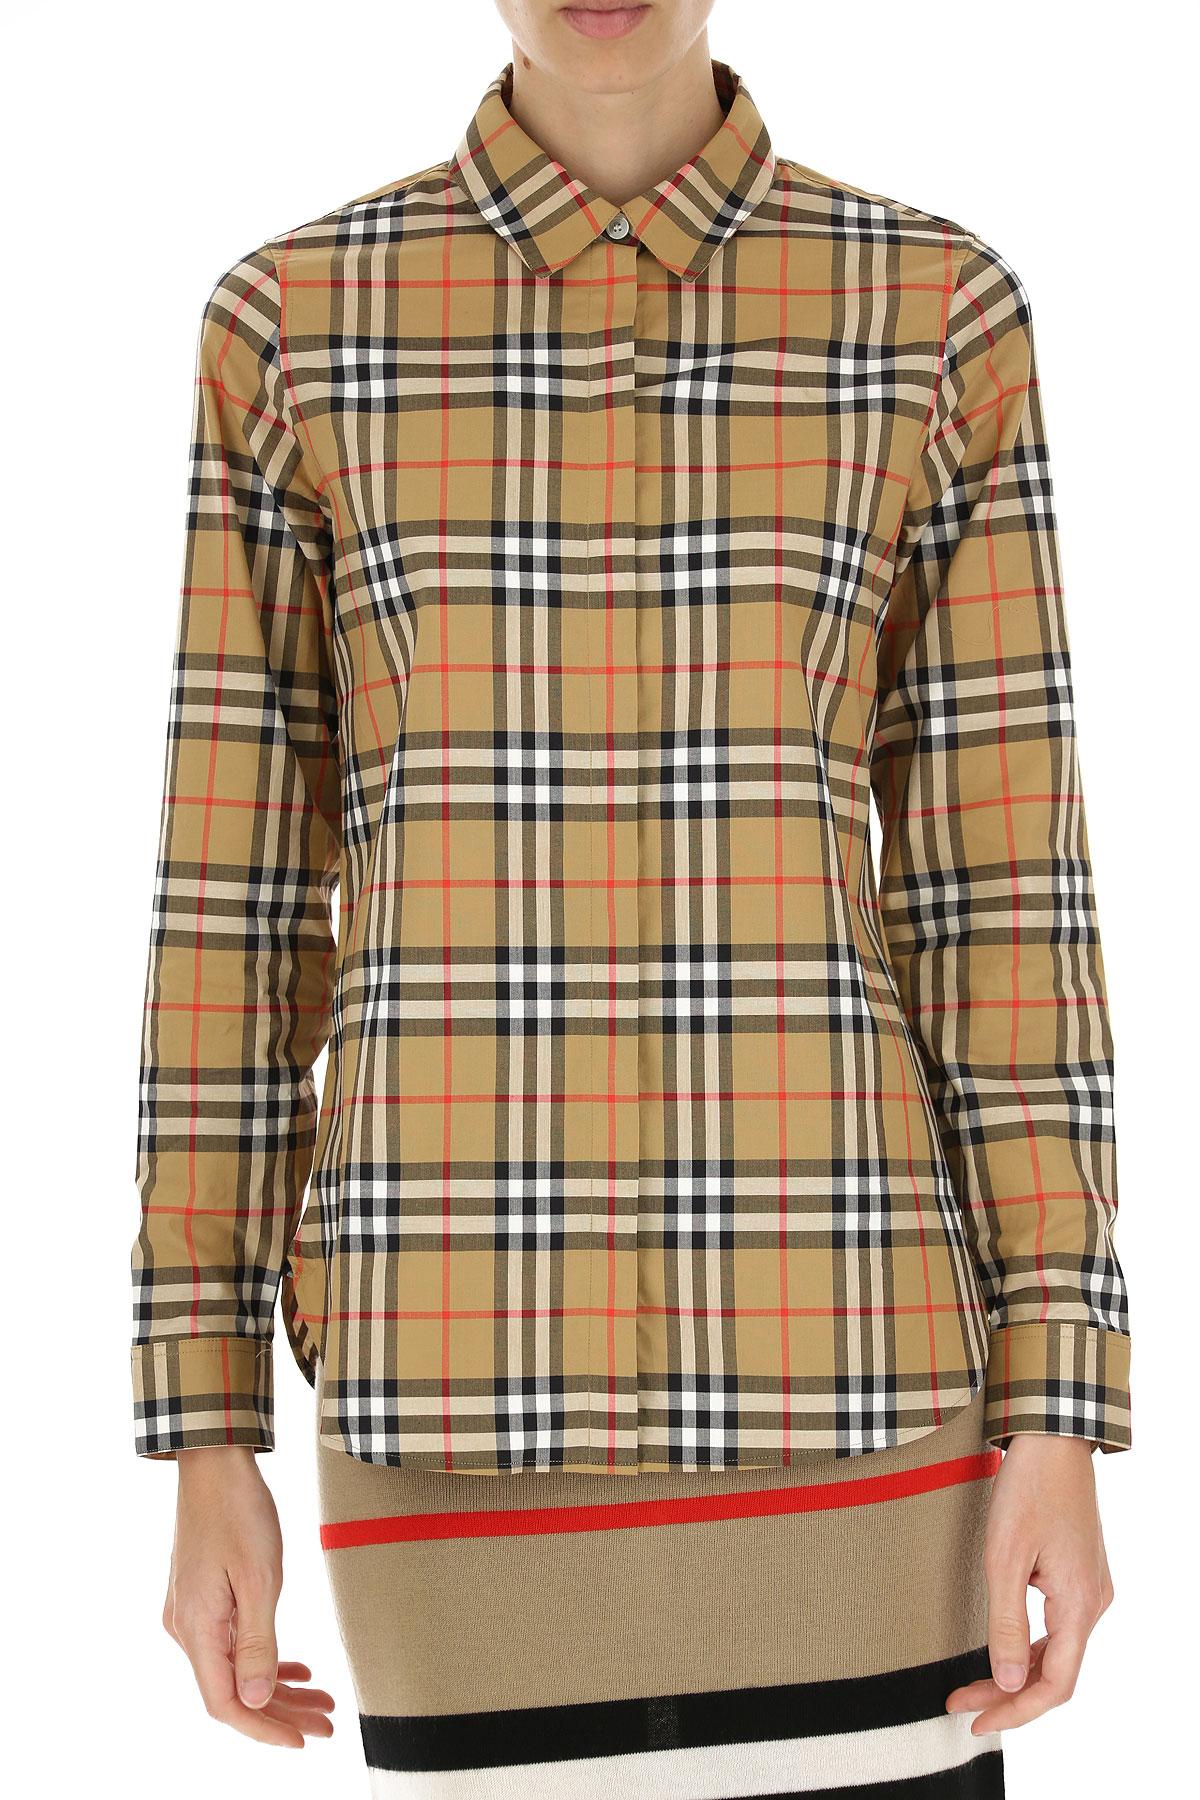 Burberry Redwing Long Shirt In Check Cotton in Beige (Natural) - Lyst